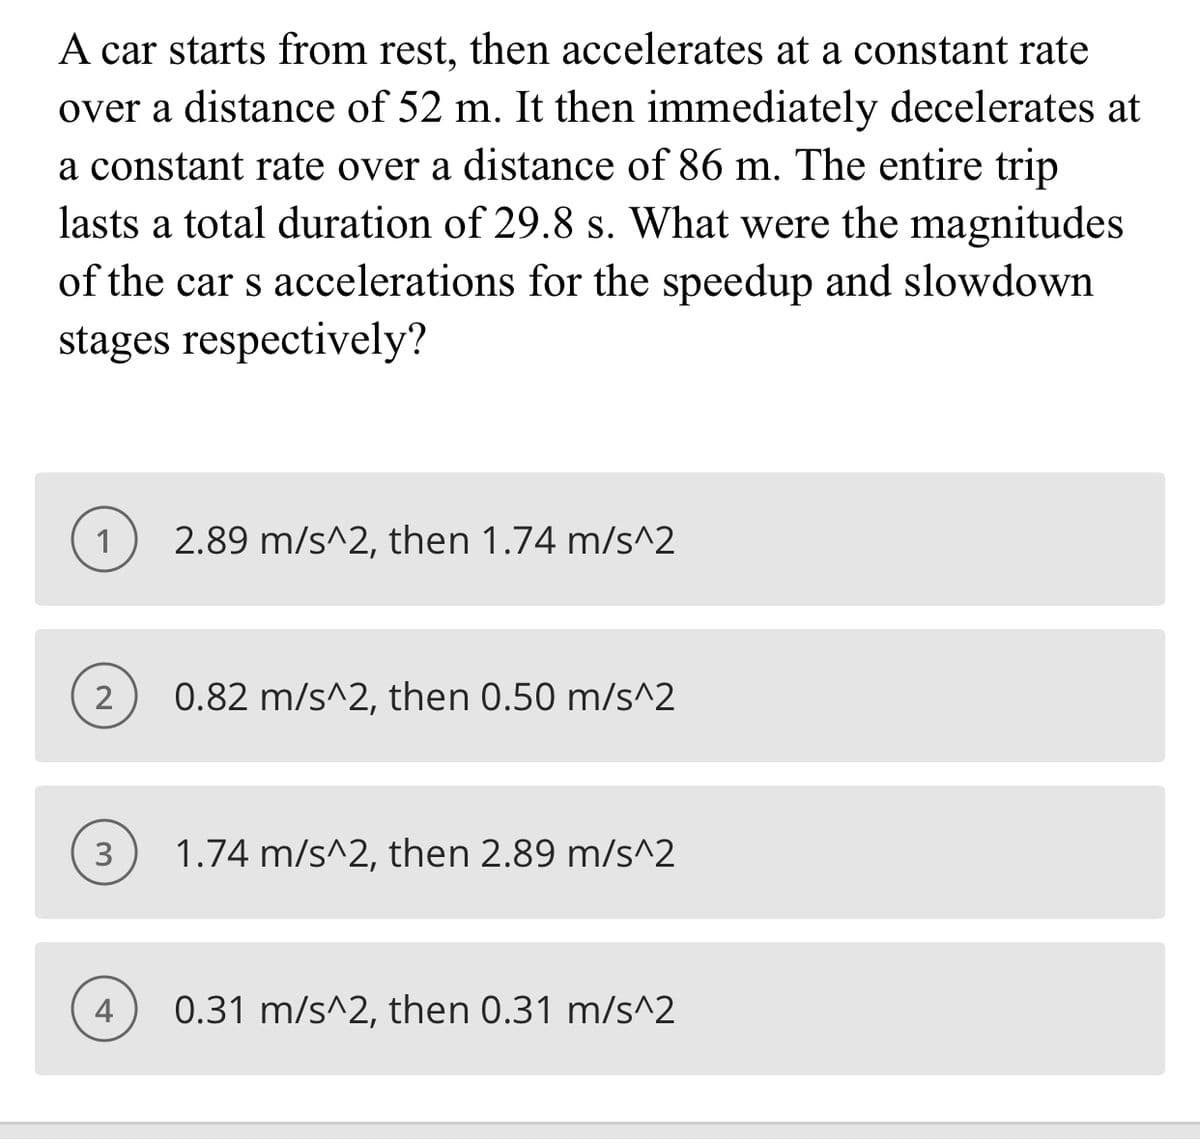 A car starts from rest, then accelerates at a constant rate
over a distance of 52 m. It then immediately decelerates at
a constant rate over a distance of 86 m. The entire trip
lasts a total duration of 29.8 s. What were the magnitudes
of the car s accelerations for the speedup and slowdown
stages respectively?
1
2.89 m/s^2, then 1.74 m/s^2
2
0.82 m/s^2, then 0.50 m/s^2
3
1.74 m/s^2, then 2.89 m/s^2
4
0.31 m/s^2, then 0.31 m/s^2
